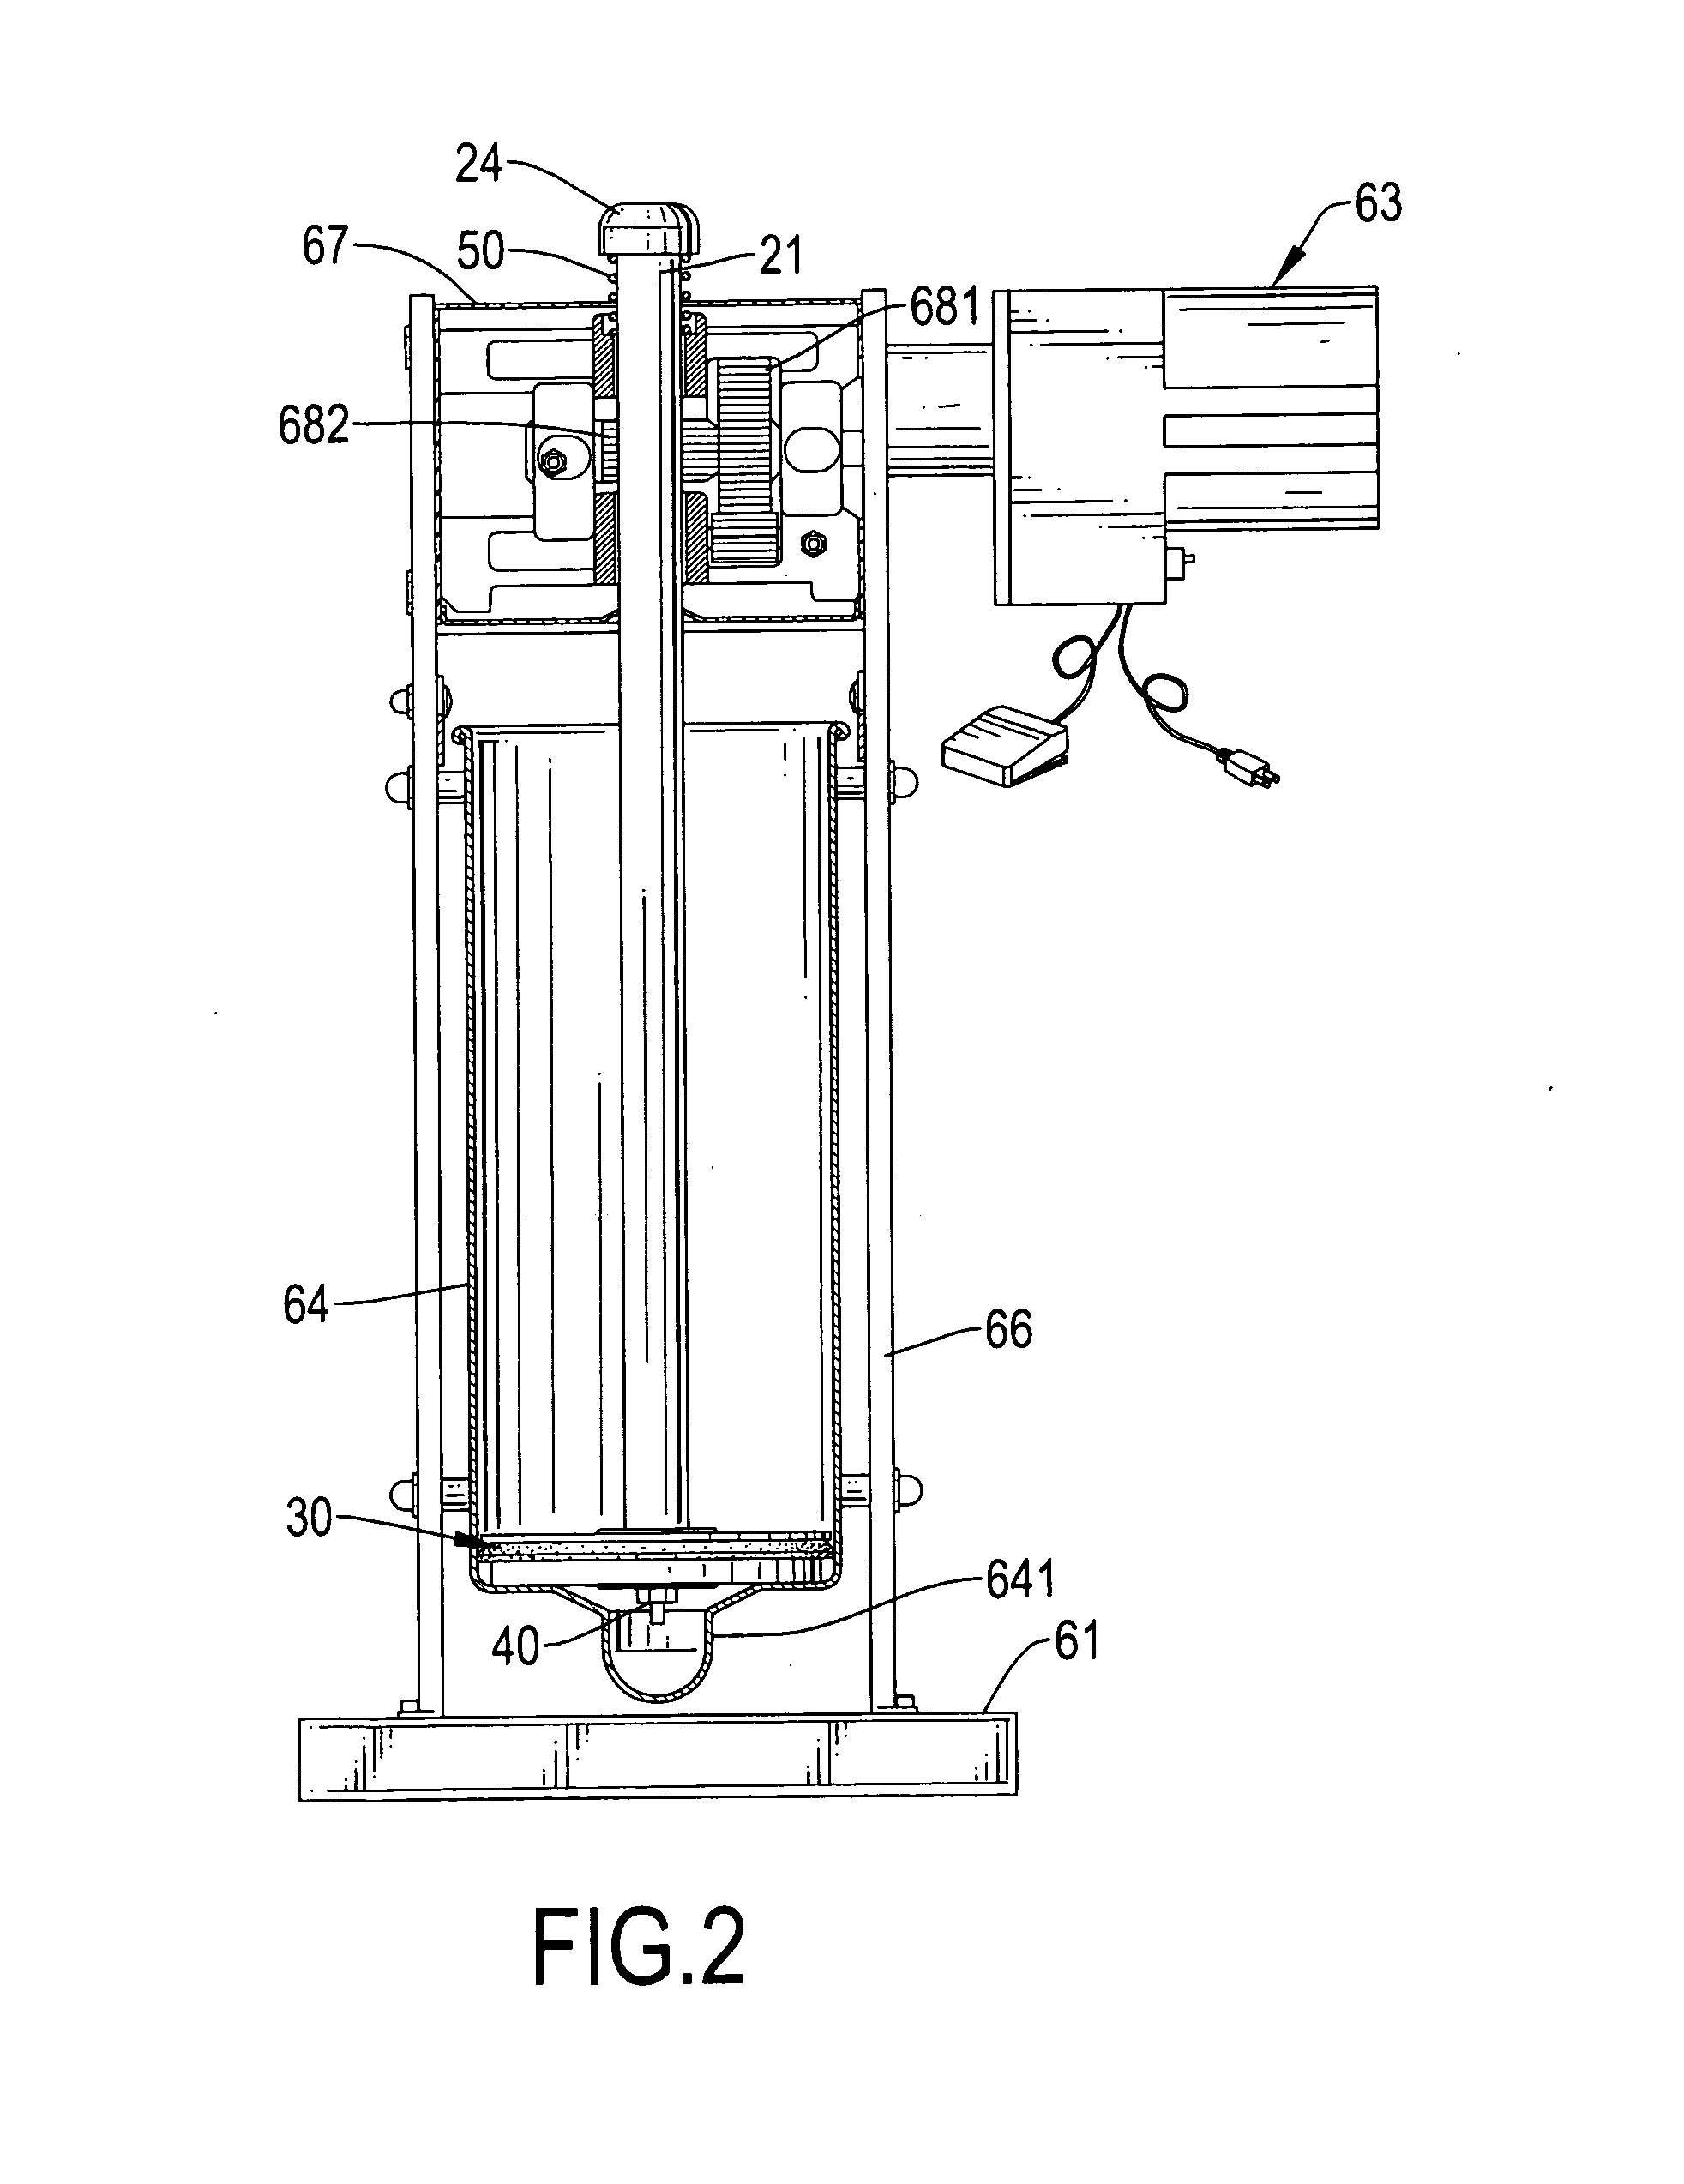 Food extrusion piston assembly